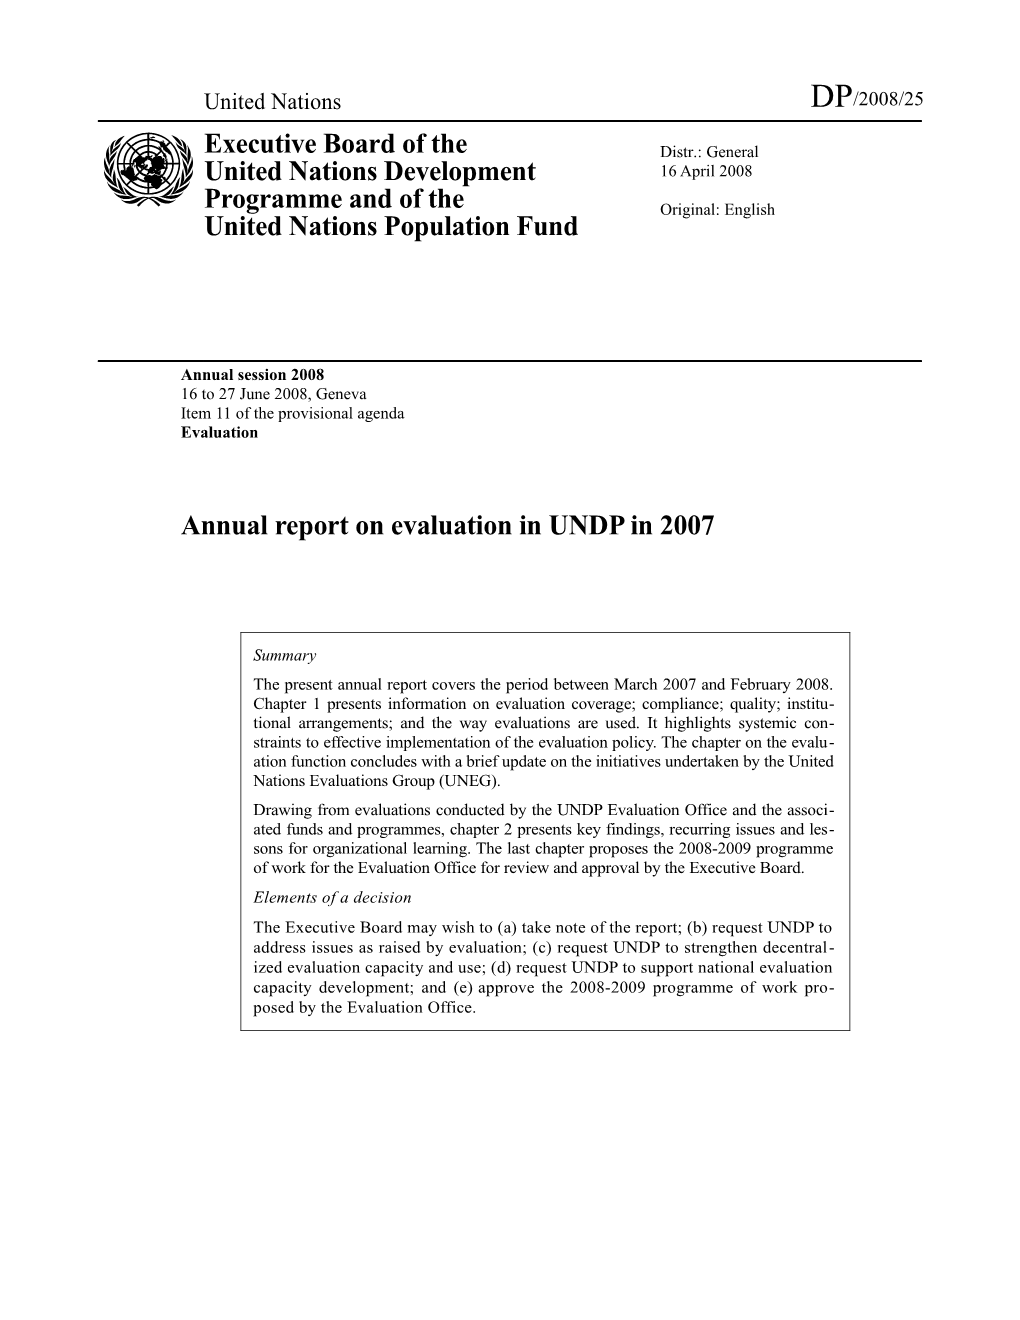 Annual Report on Evaluation in UNDP in 2007